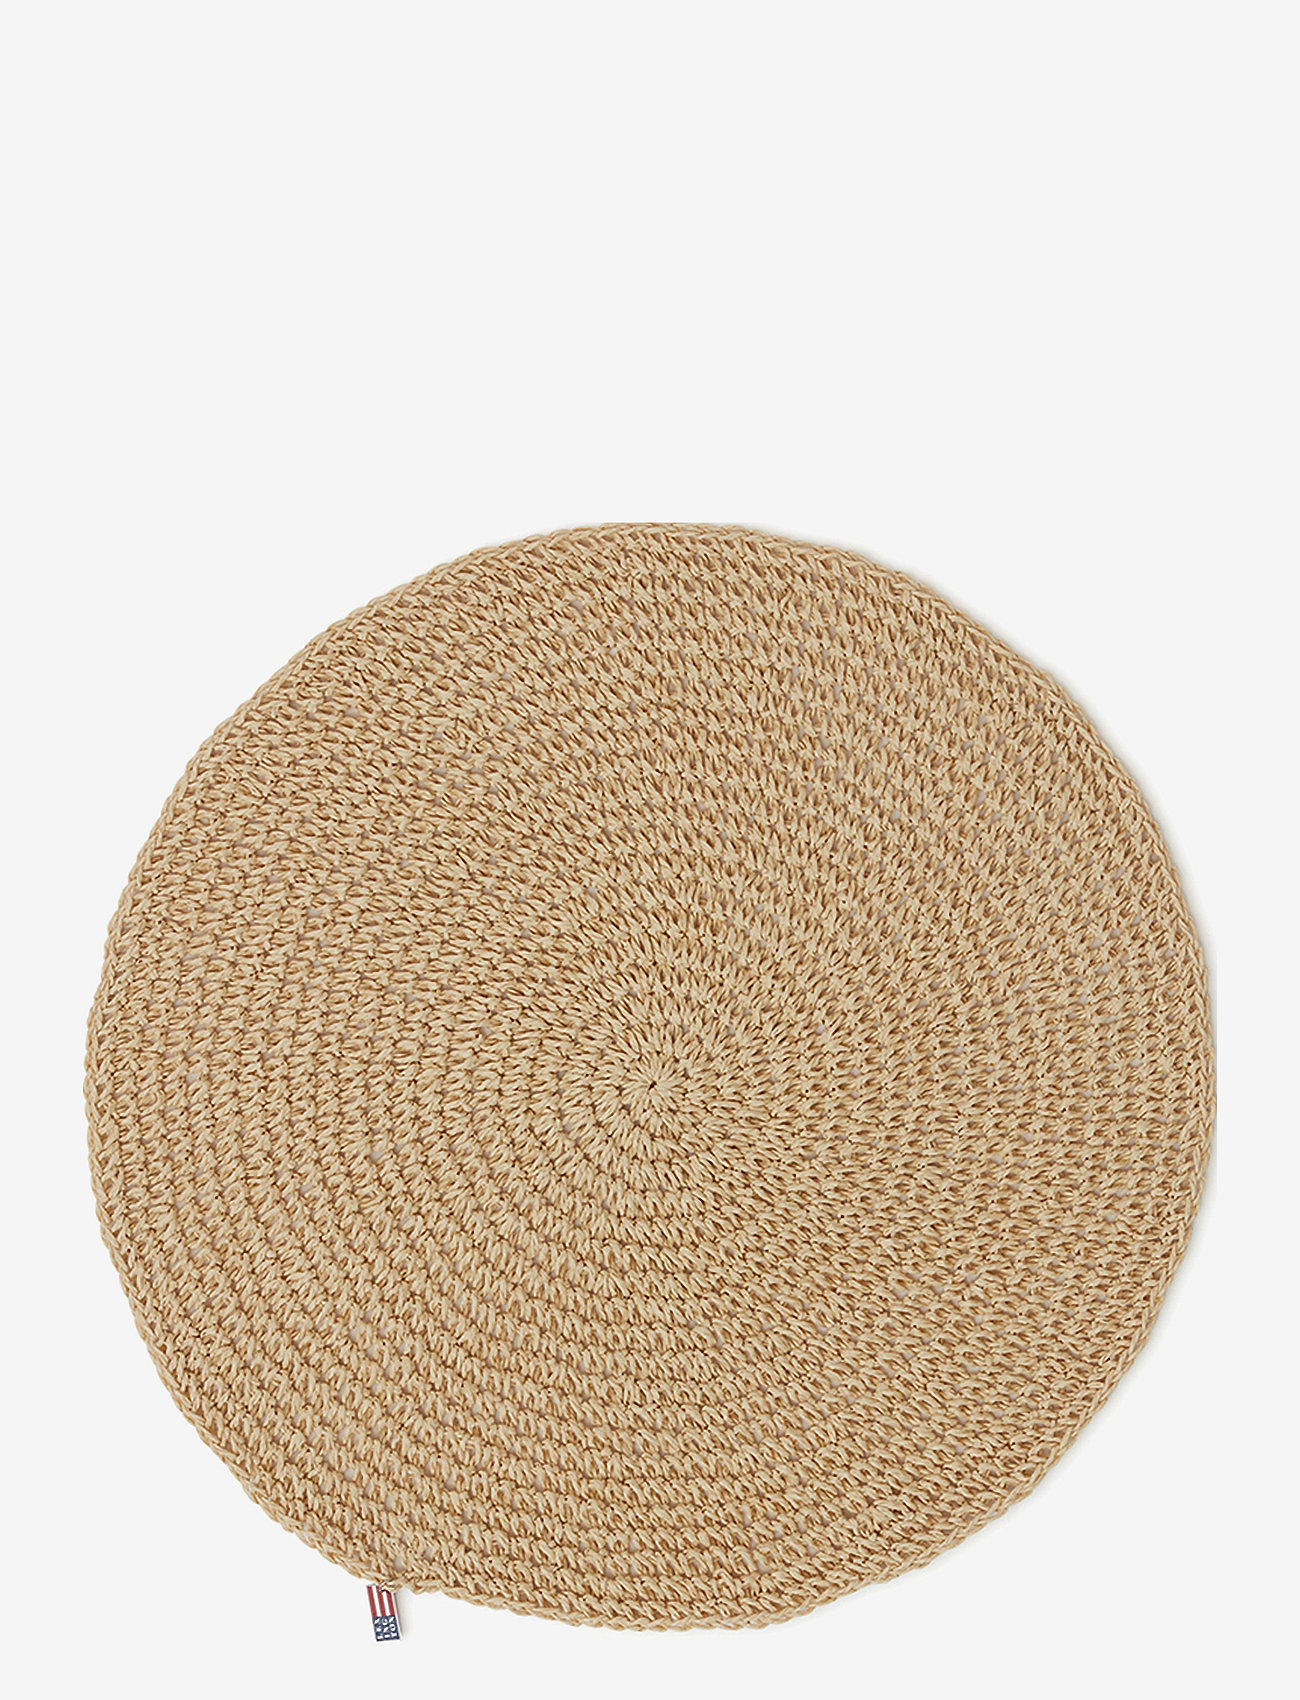 Lexington Home - Round Recycled Paper Straw Placemat - lowest prices - natural - 0